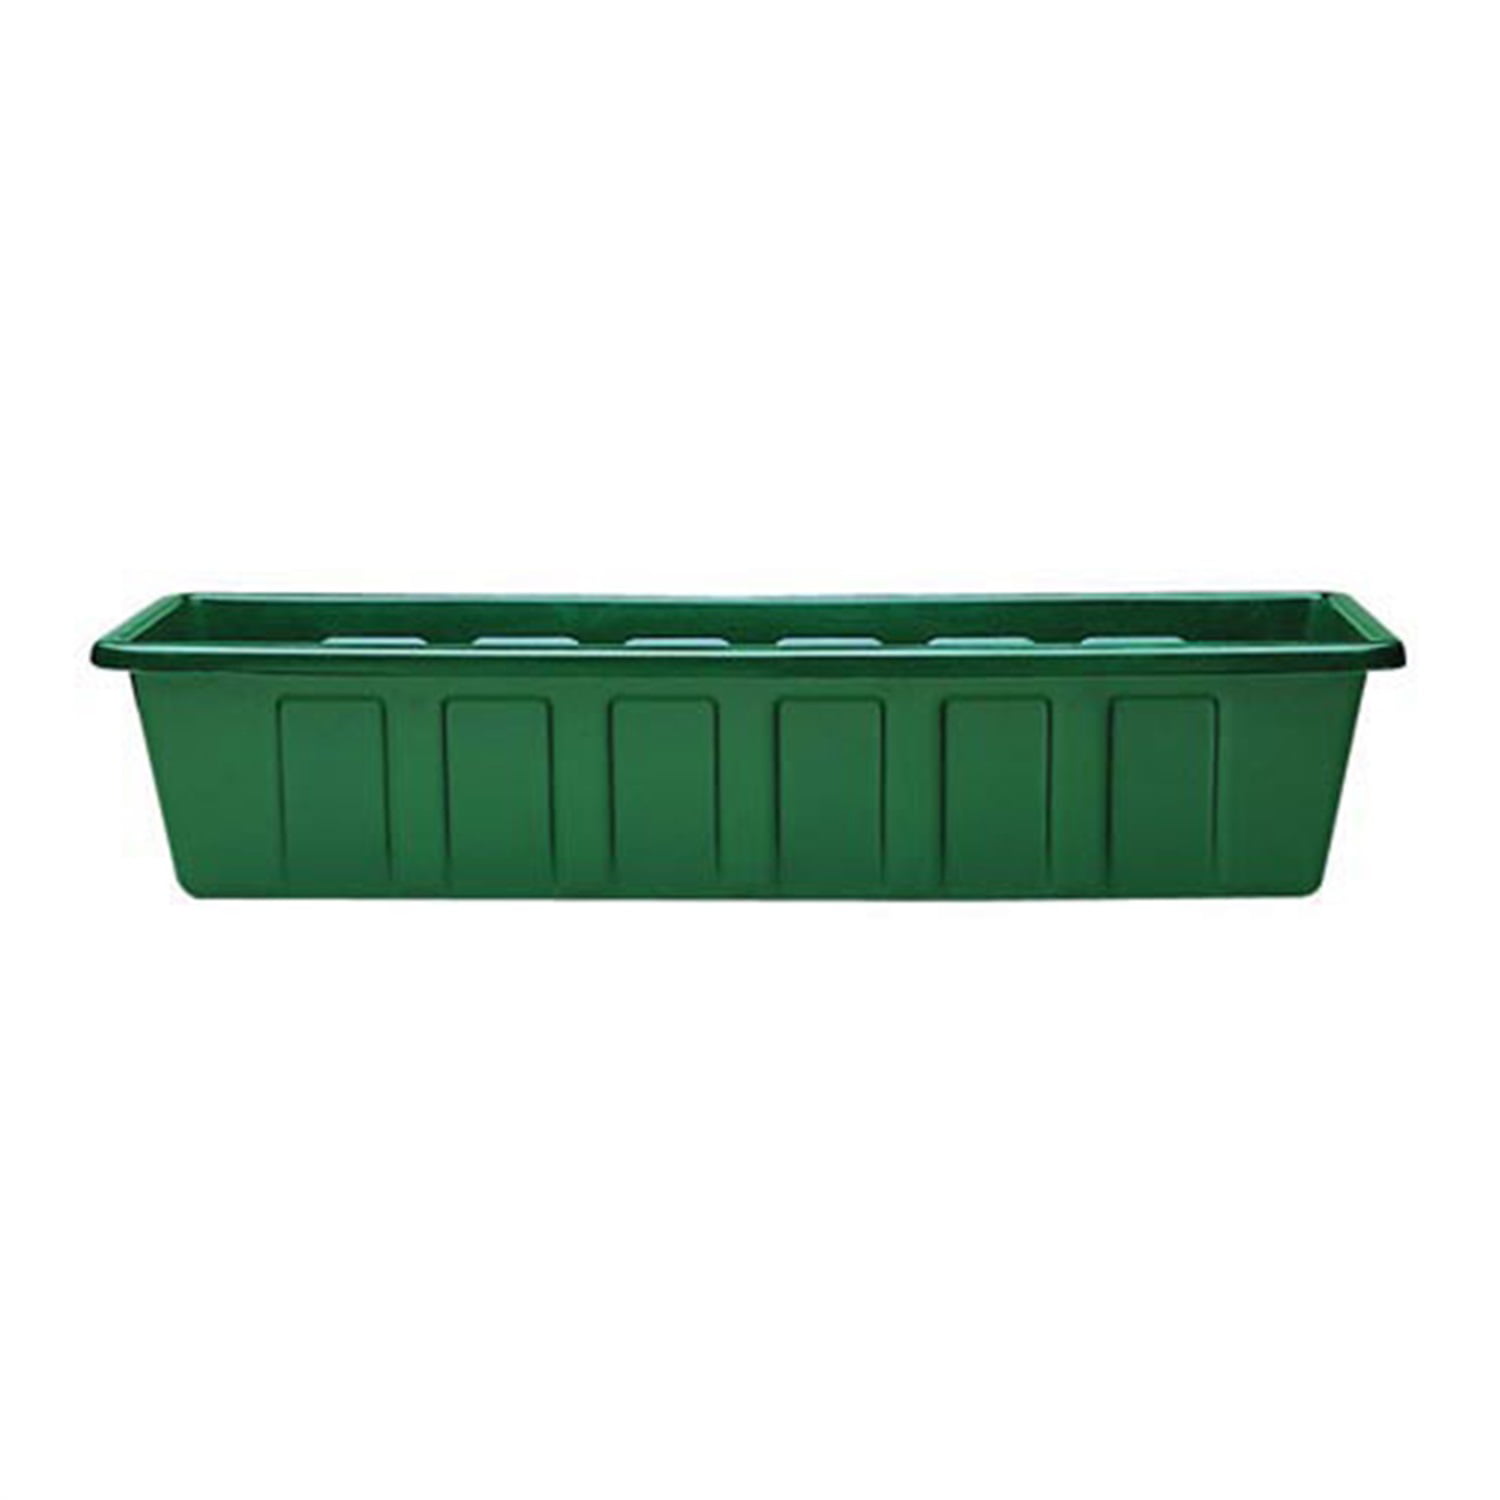 Novelty Poly-pro Planter Liner 203475 Flower Boxes Pots and Planters for sale online 